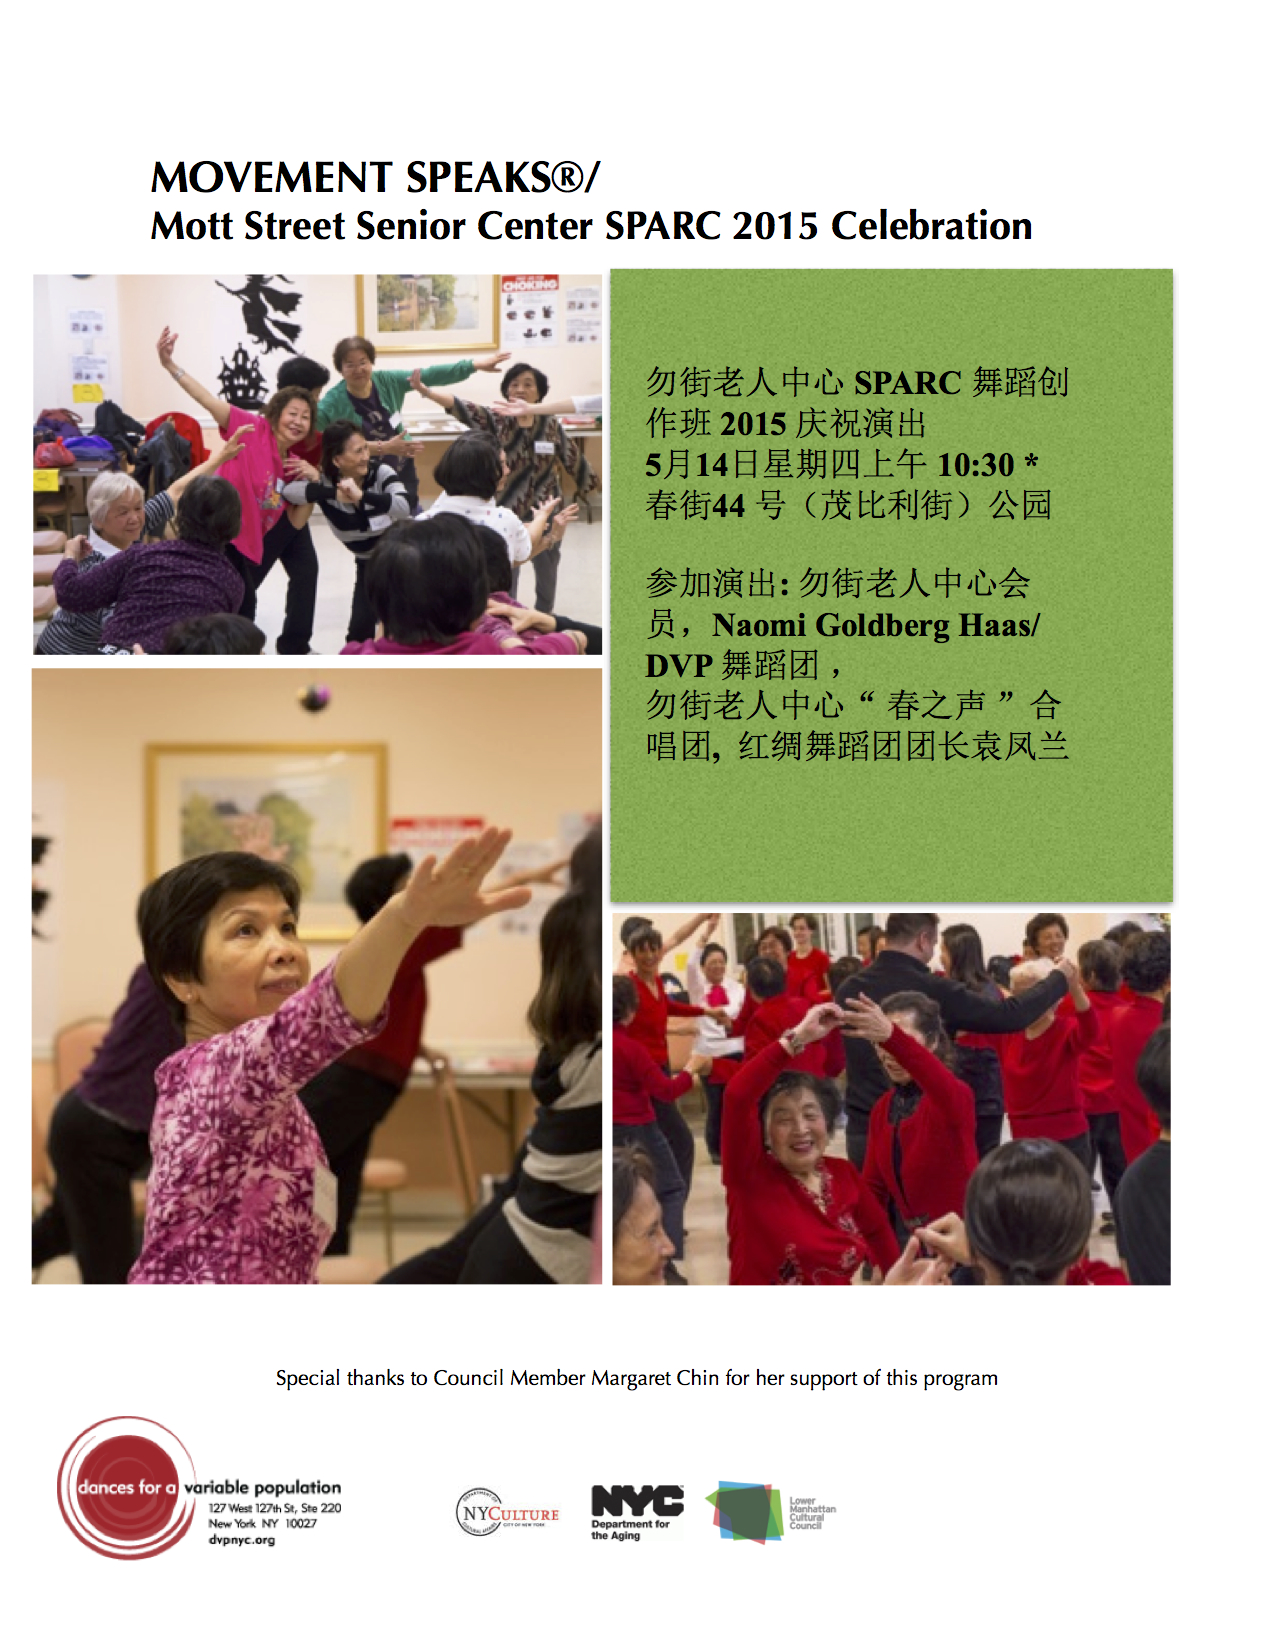 Mott Street SPARC Performance May 6 2015 CHINESE